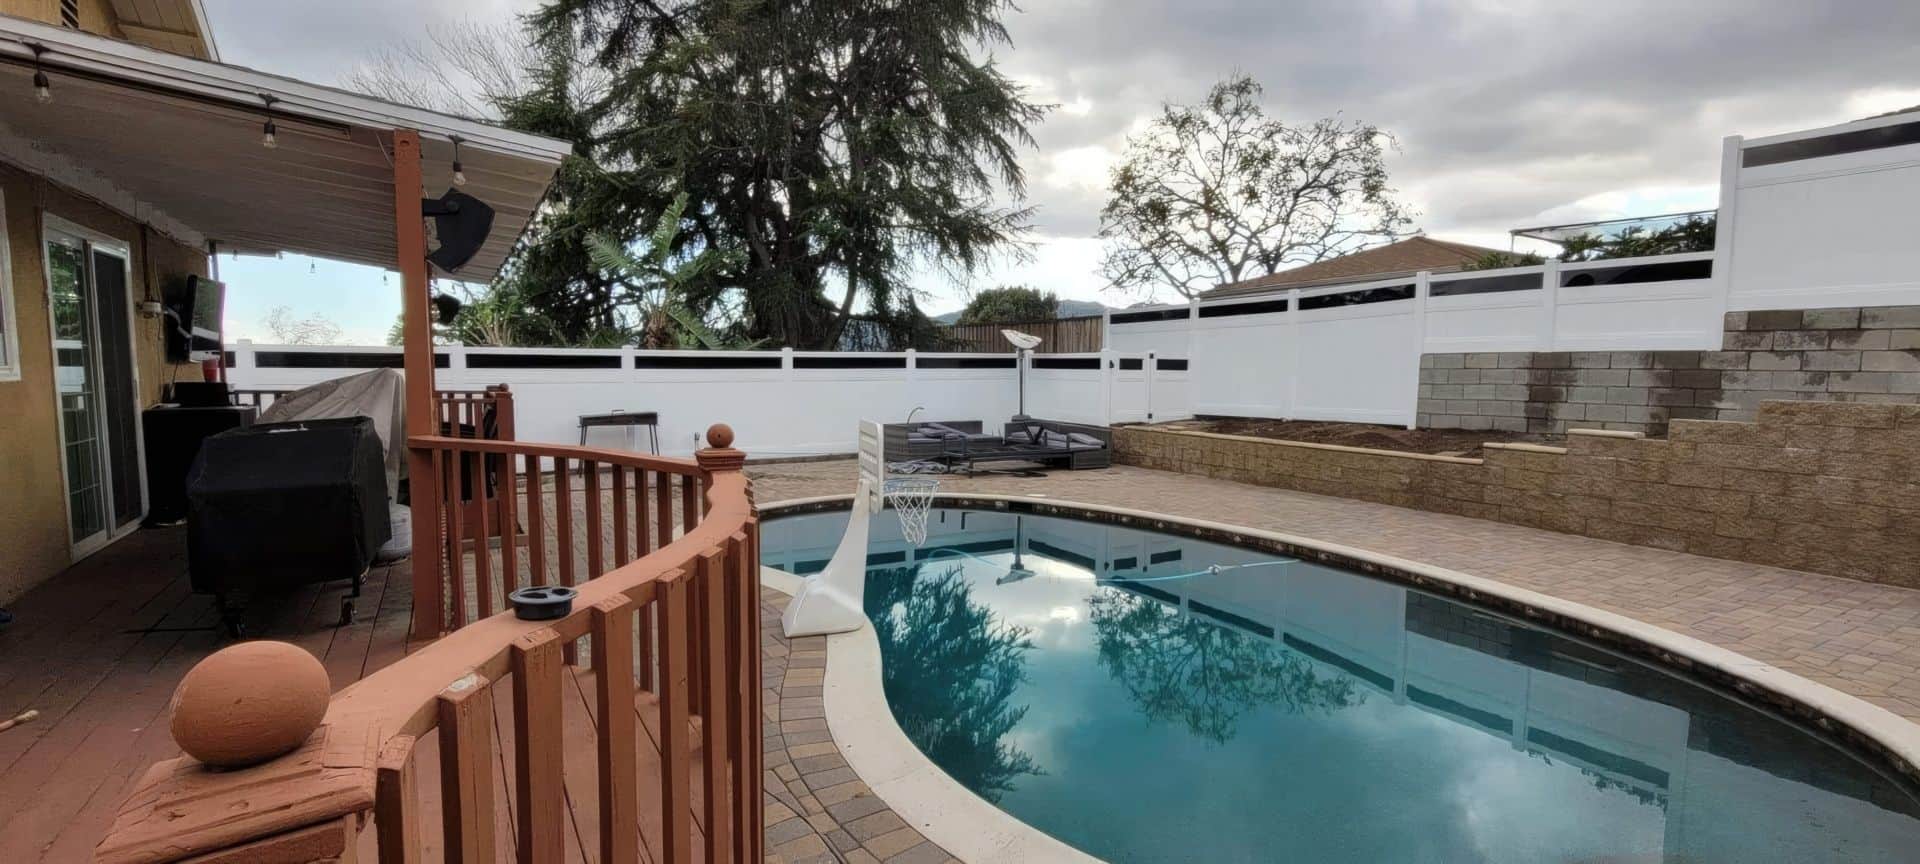 Vinyl pool fence with gate keeping the pool area with concrete boundary walls and flooring from the rest of the house.